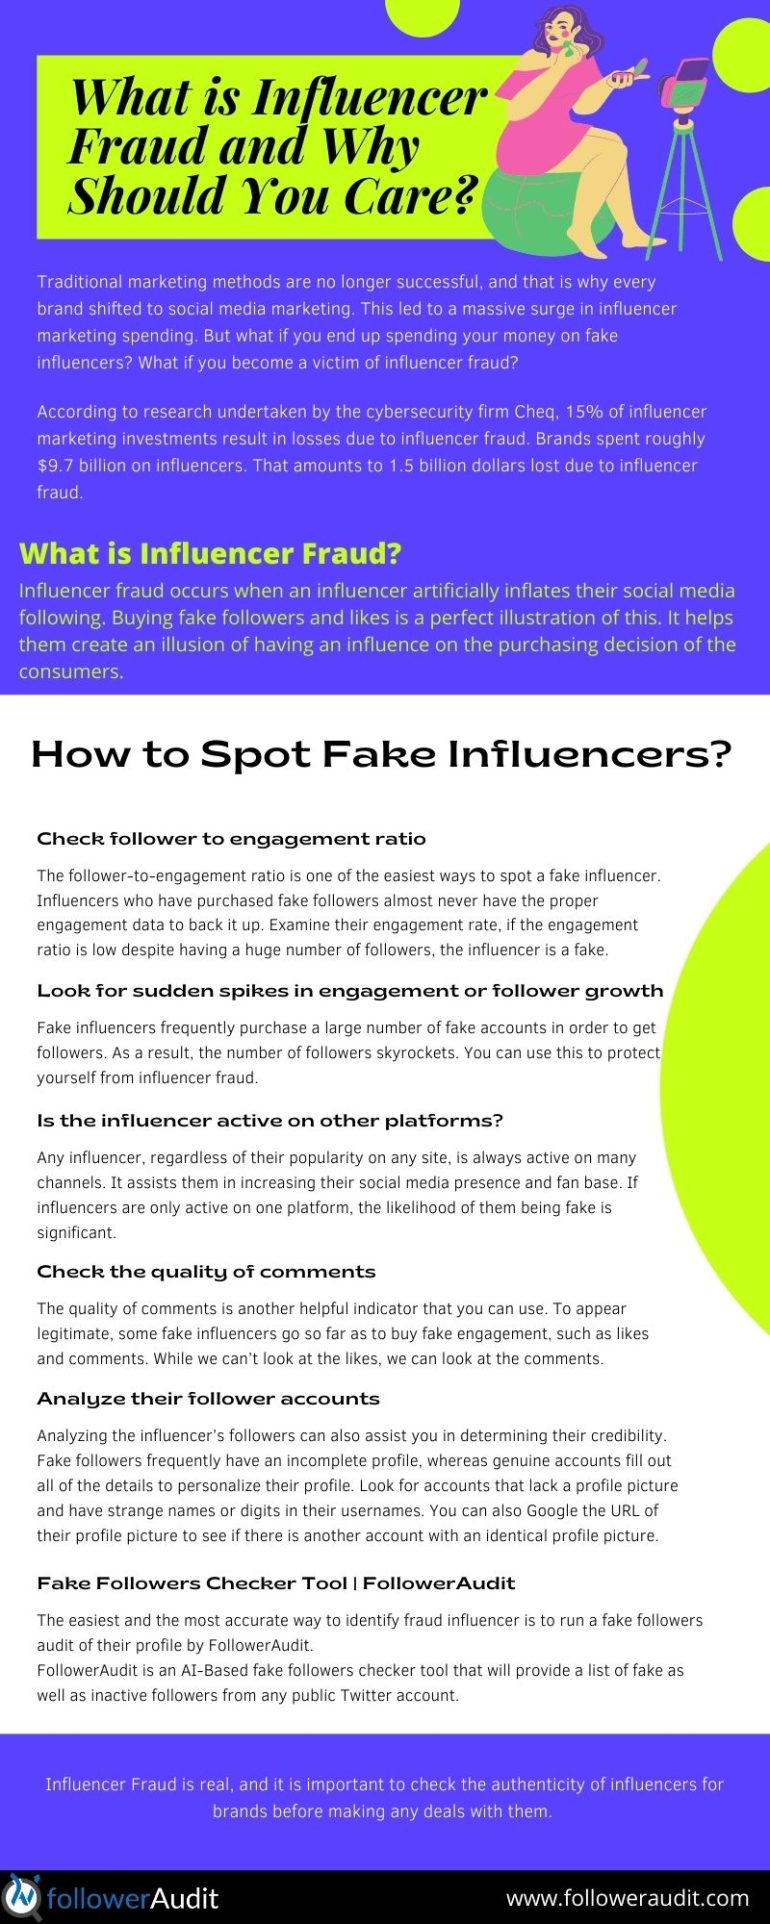 What is Influencer Fraud and Why Should You Care?